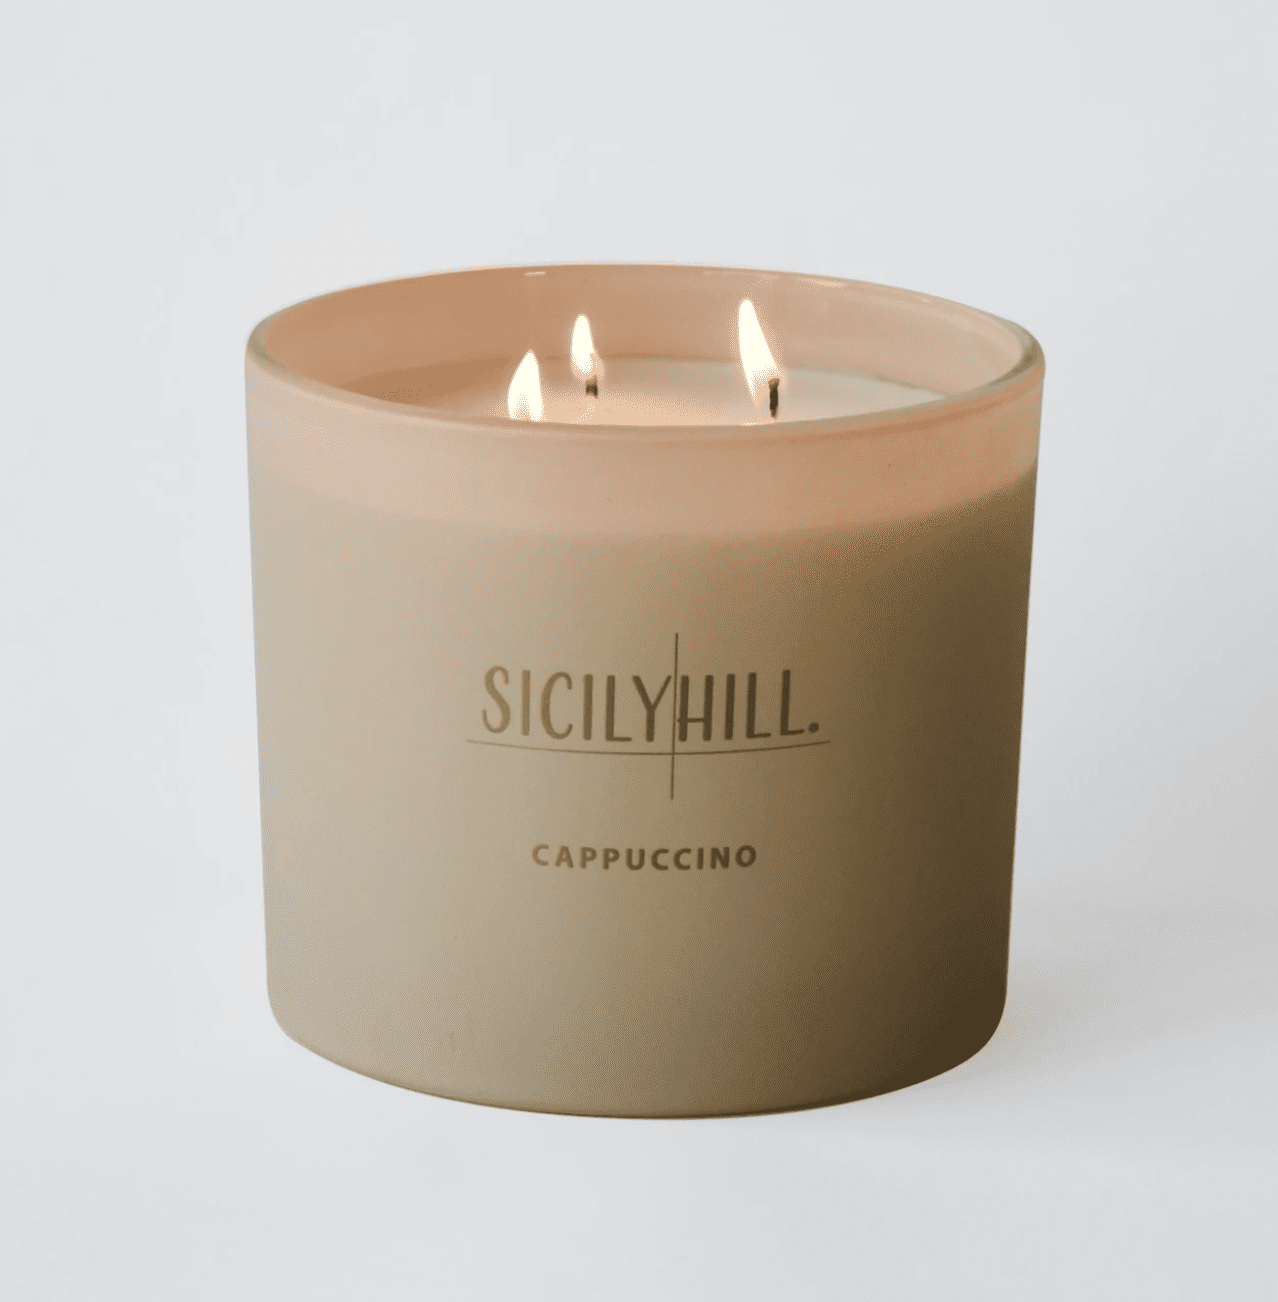 https://cdn.apartmenttherapy.info/image/upload/v1616126035/gen-workflow/product-database/Cappuccino%20Triple%20Wick%20Candle.png